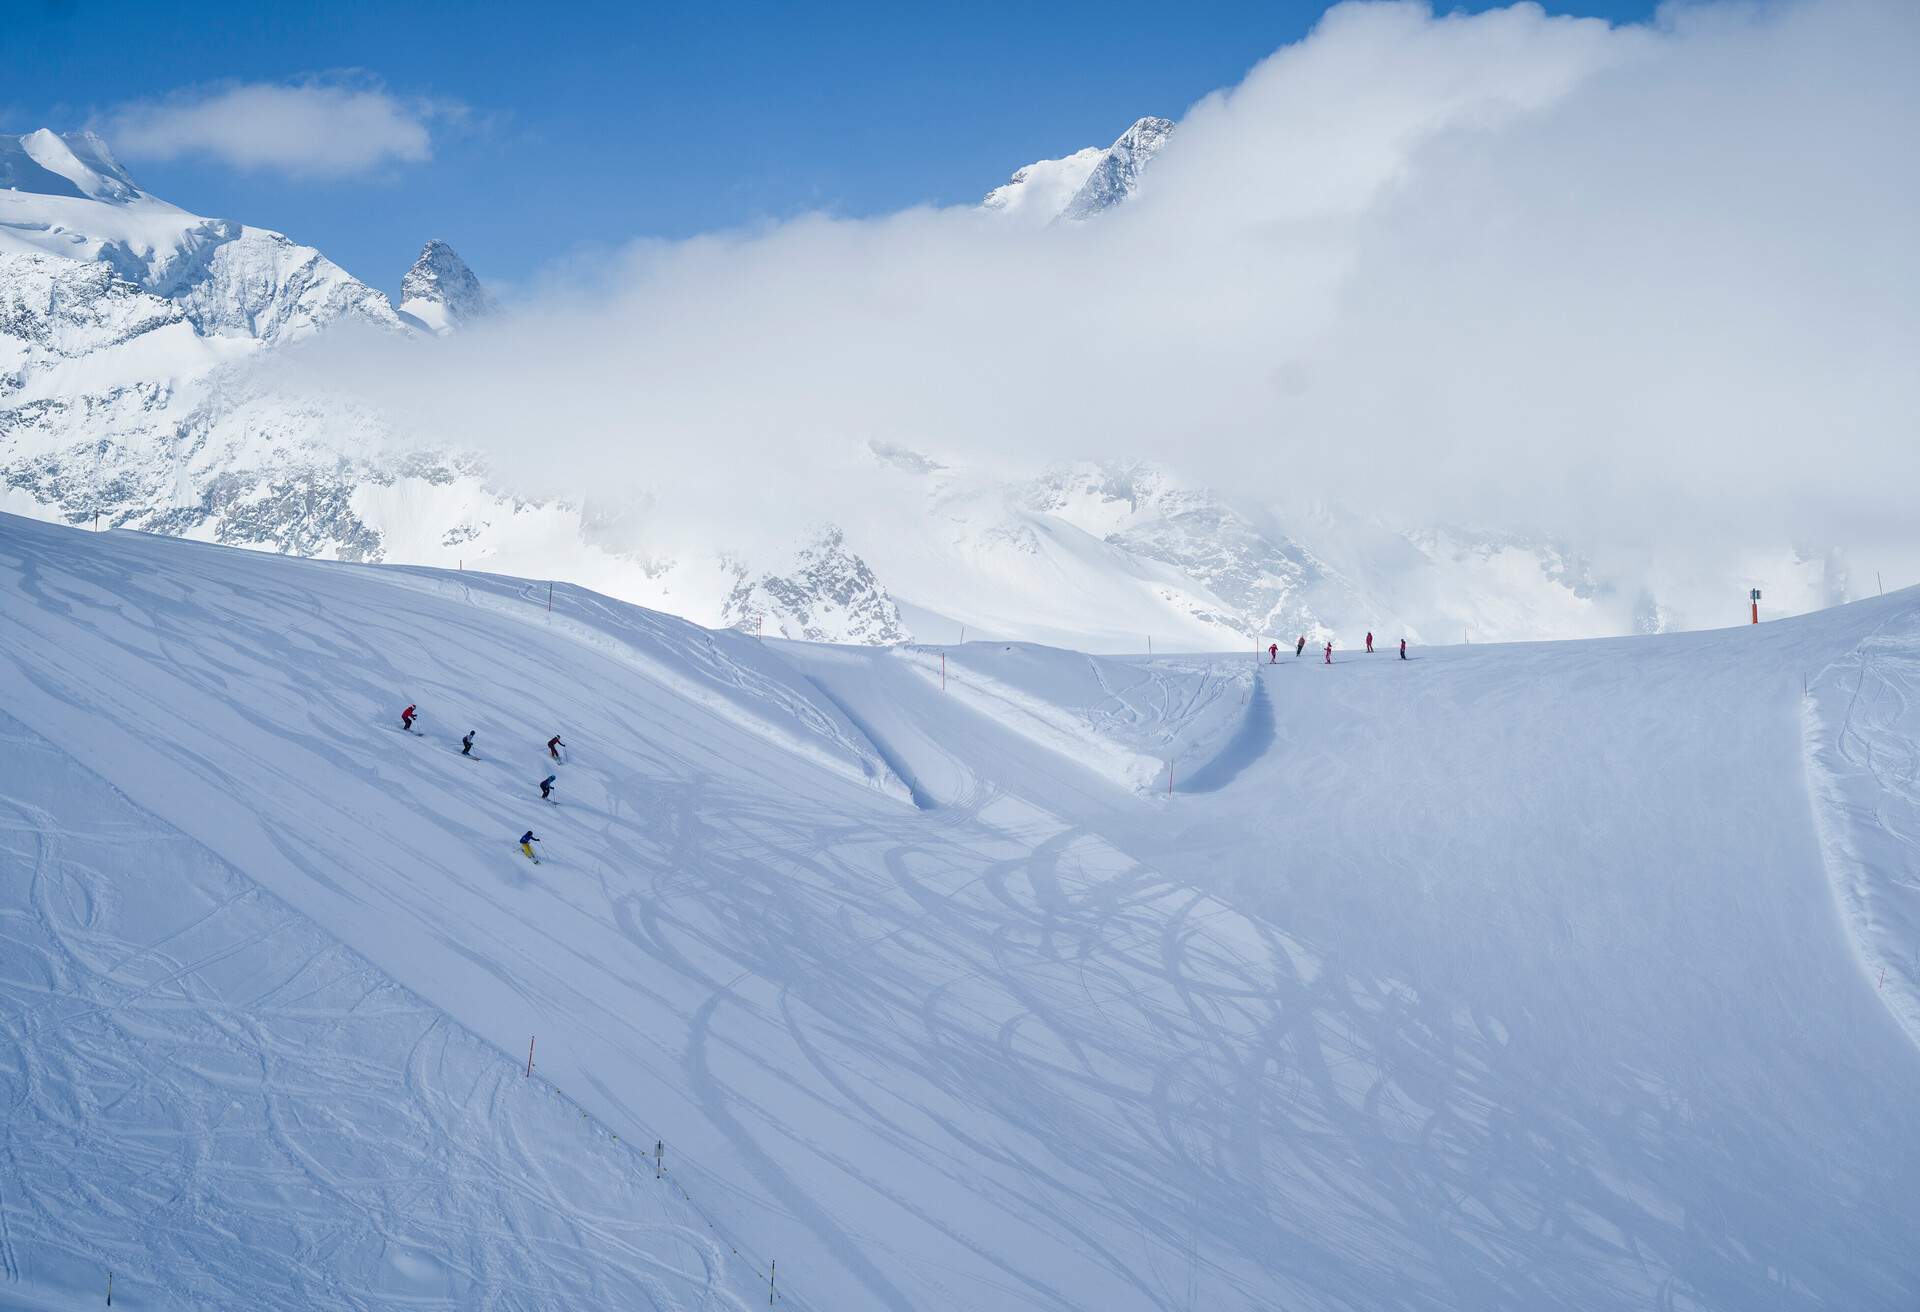 Skiers descend on a piste with a view of mountains covered in snow and a sea of clouds.